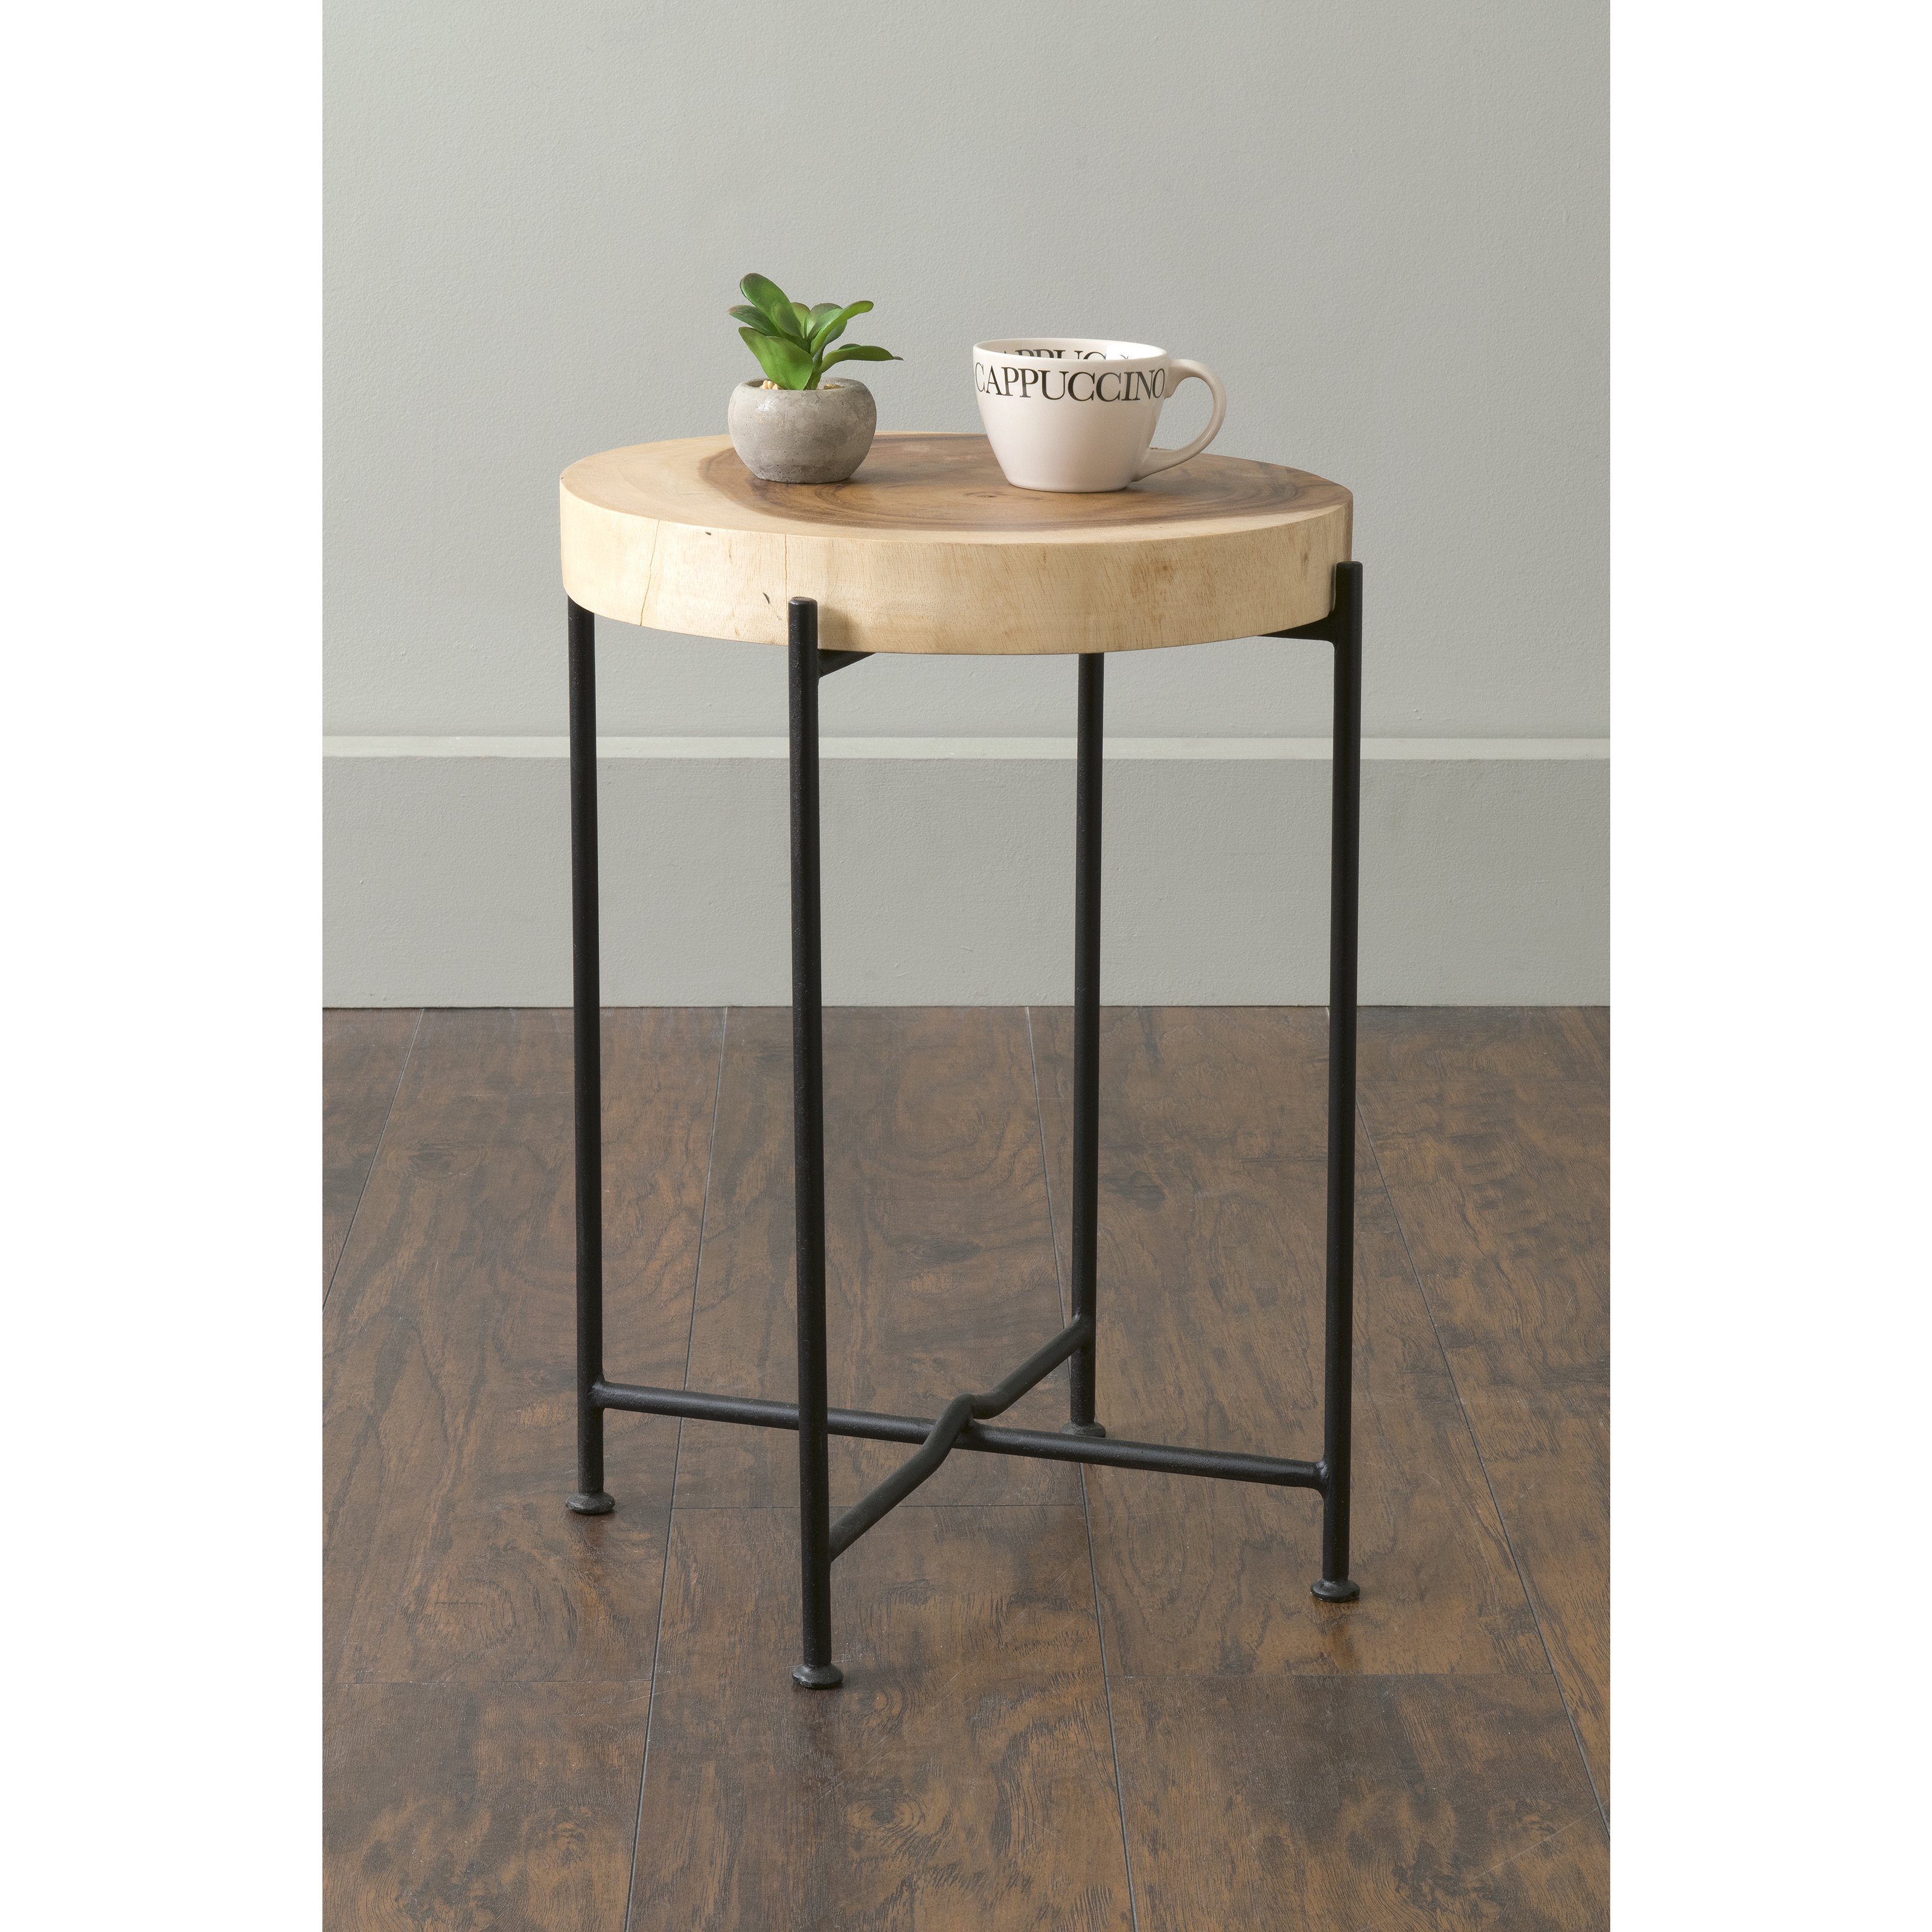 east main rico brown round transitional teakwood accent mains table free shipping today nesting tables plexiglass metal chairside iron and chairs electric wall clock black side